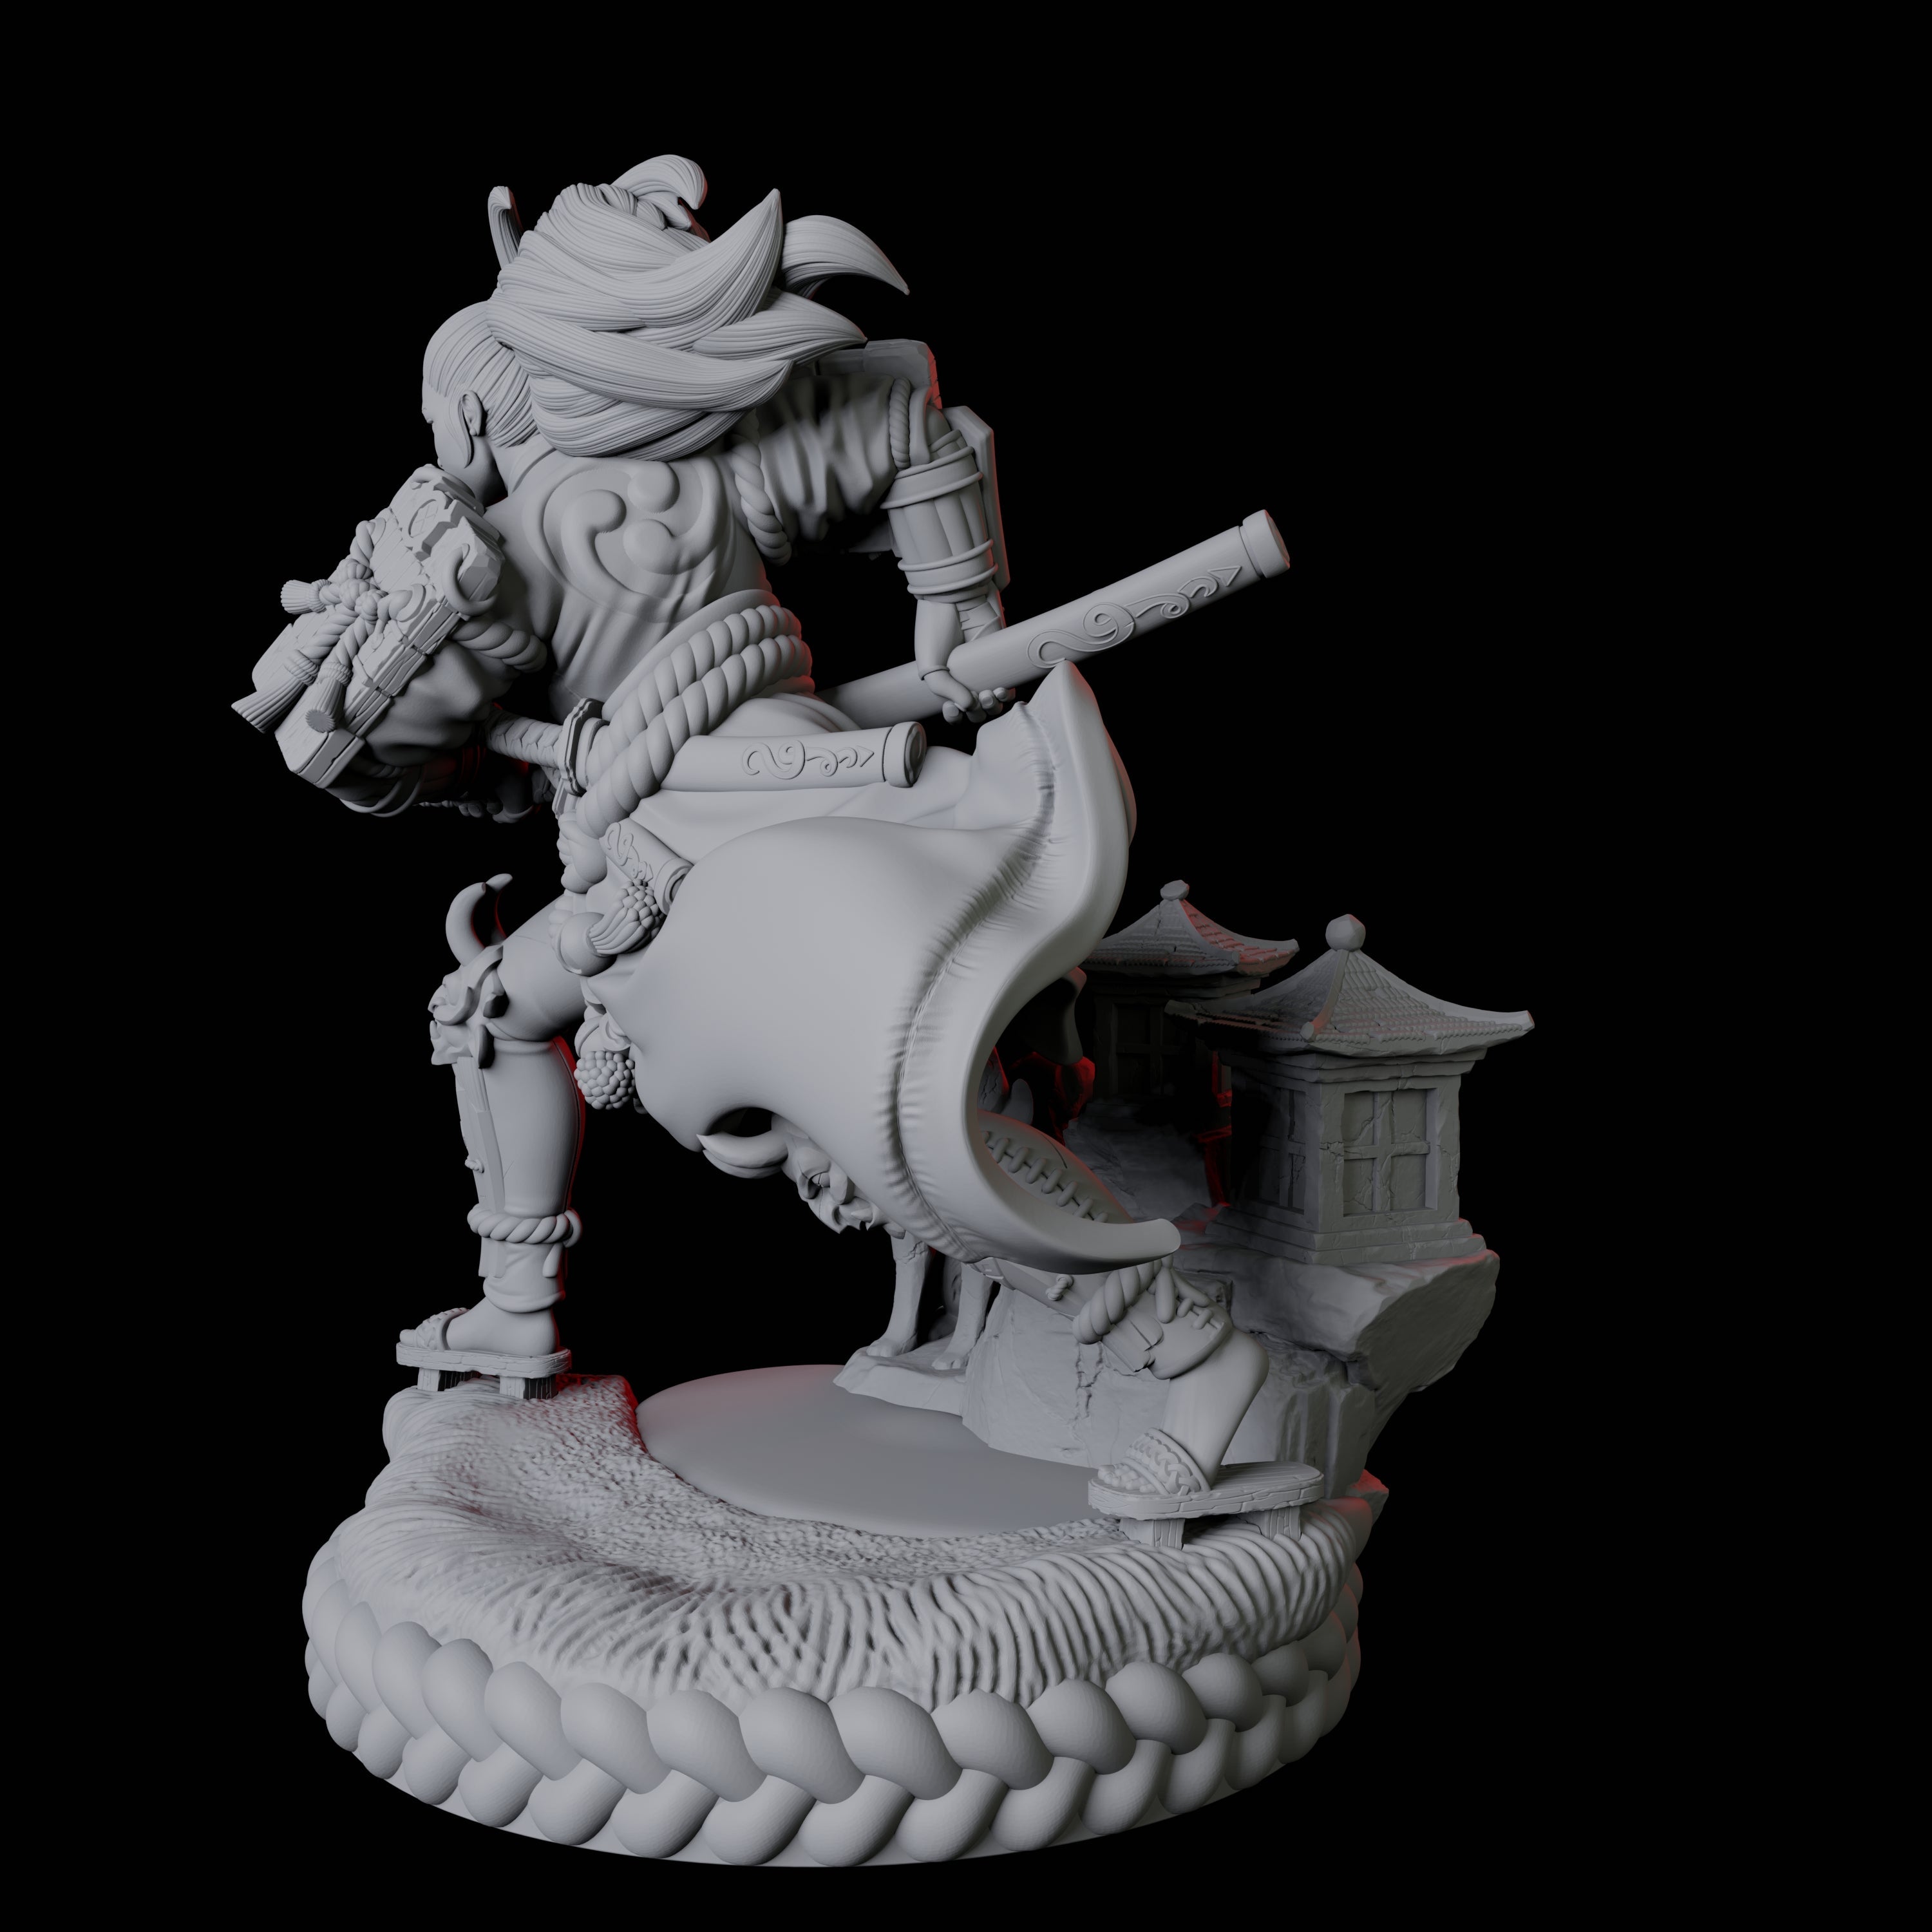 Striking Samurai Miniature for Dungeons and Dragons, Pathfinder or other TTRPGs